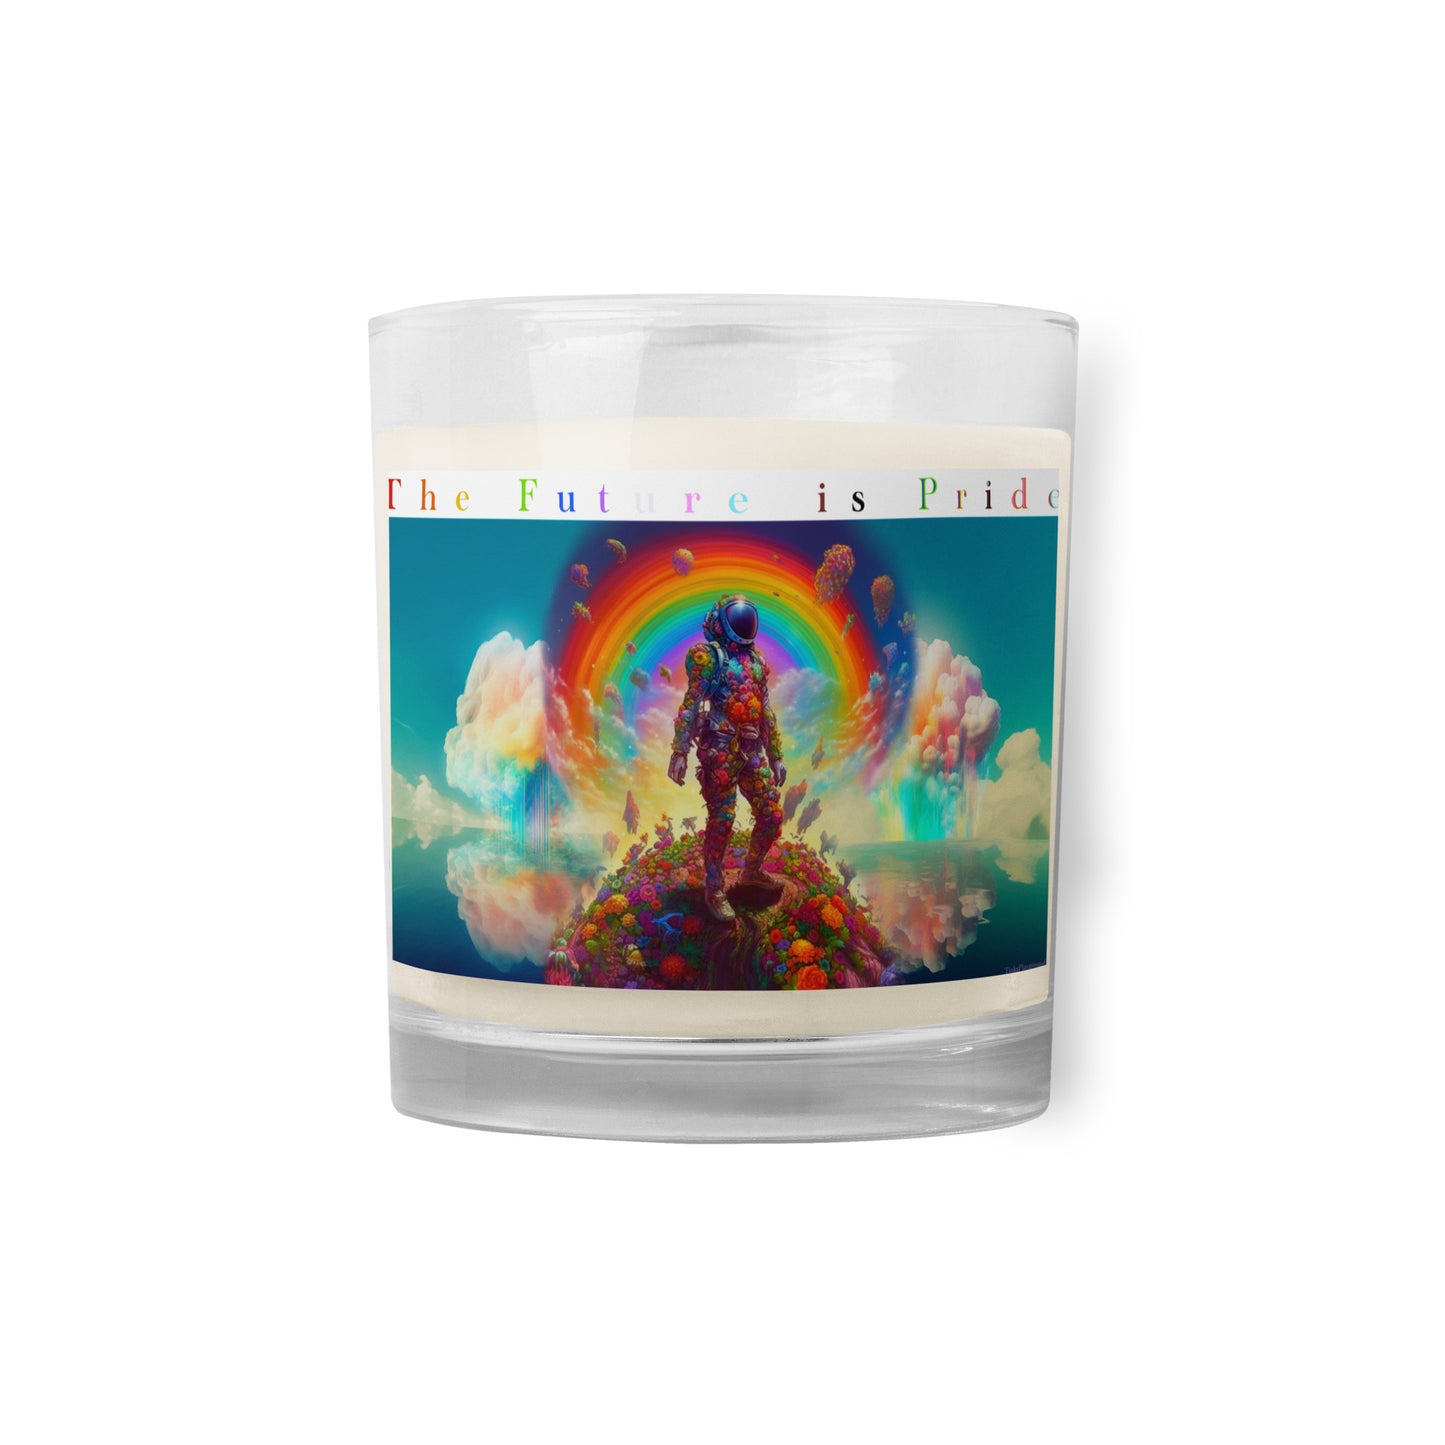 The Future is Pride! Candle